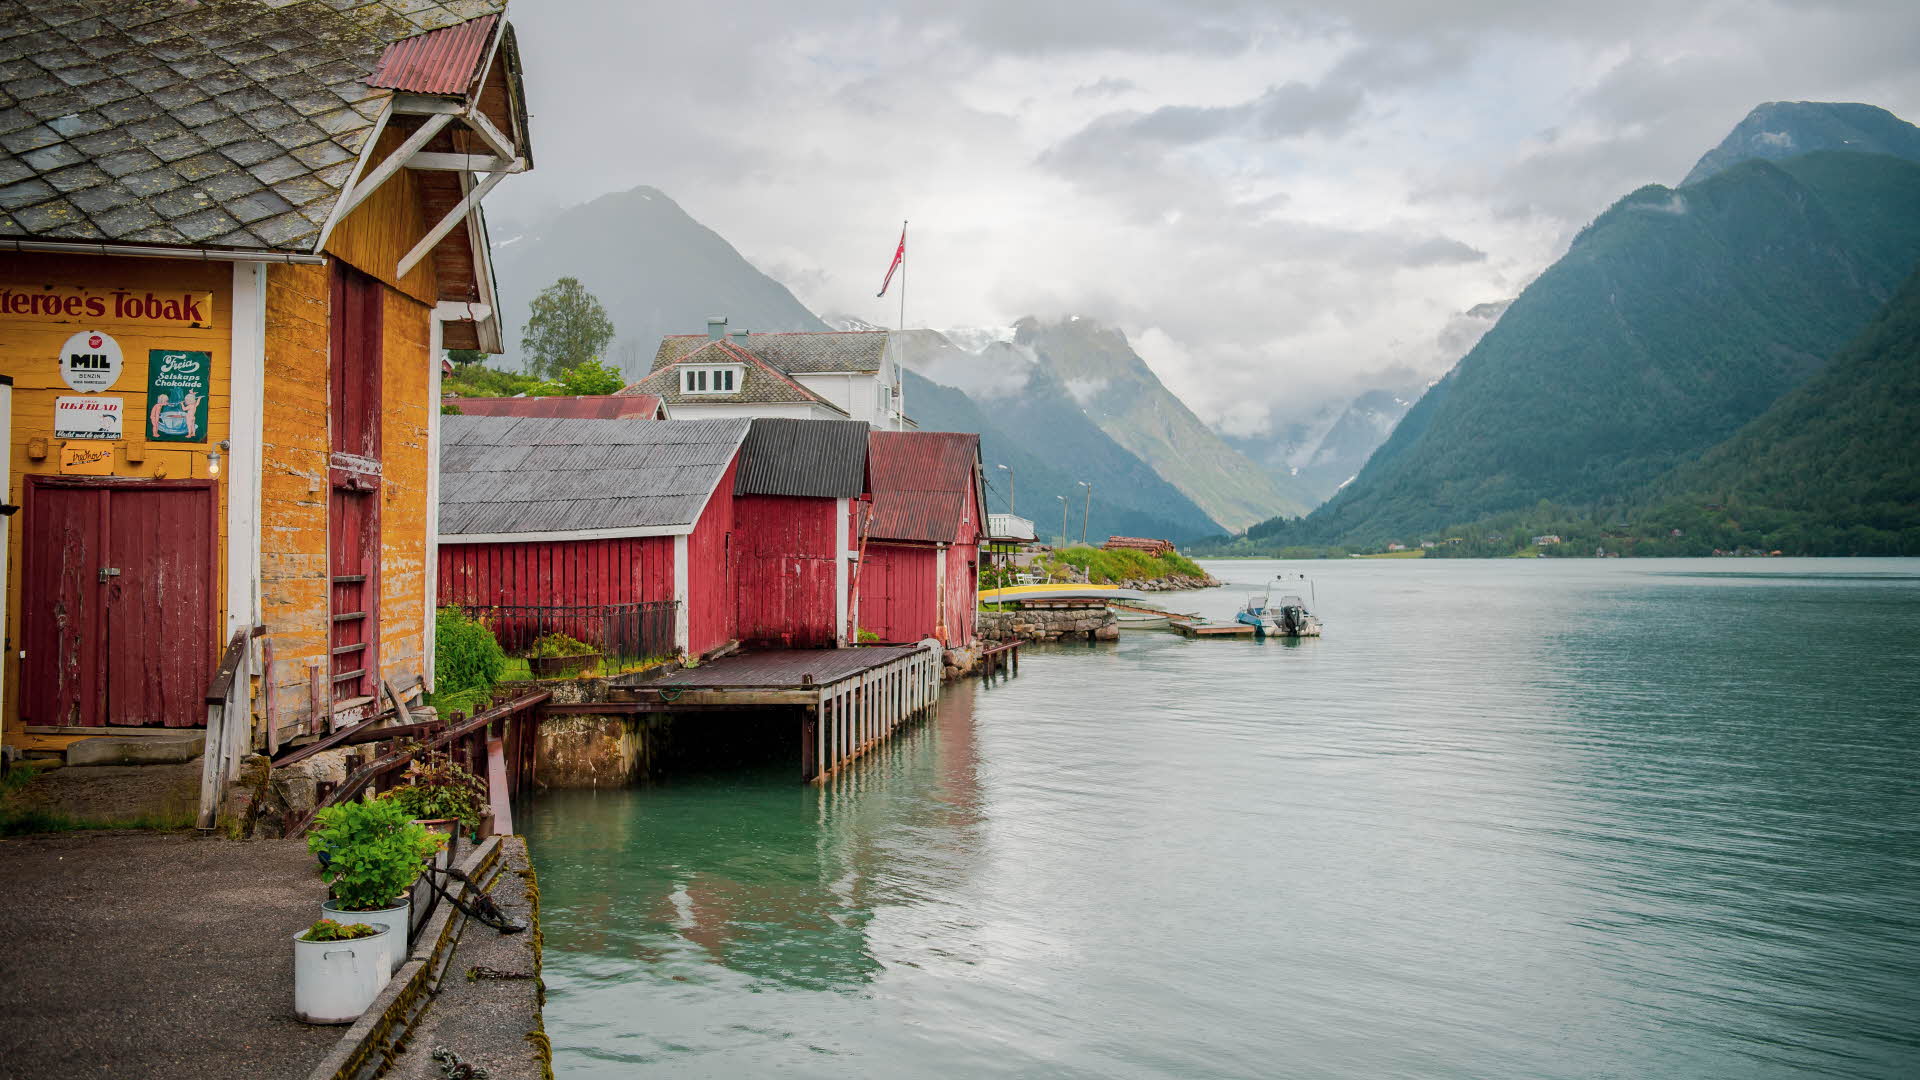 Yellow and red boathouses on the Fjærlandsfjord, clouds covering the mountains